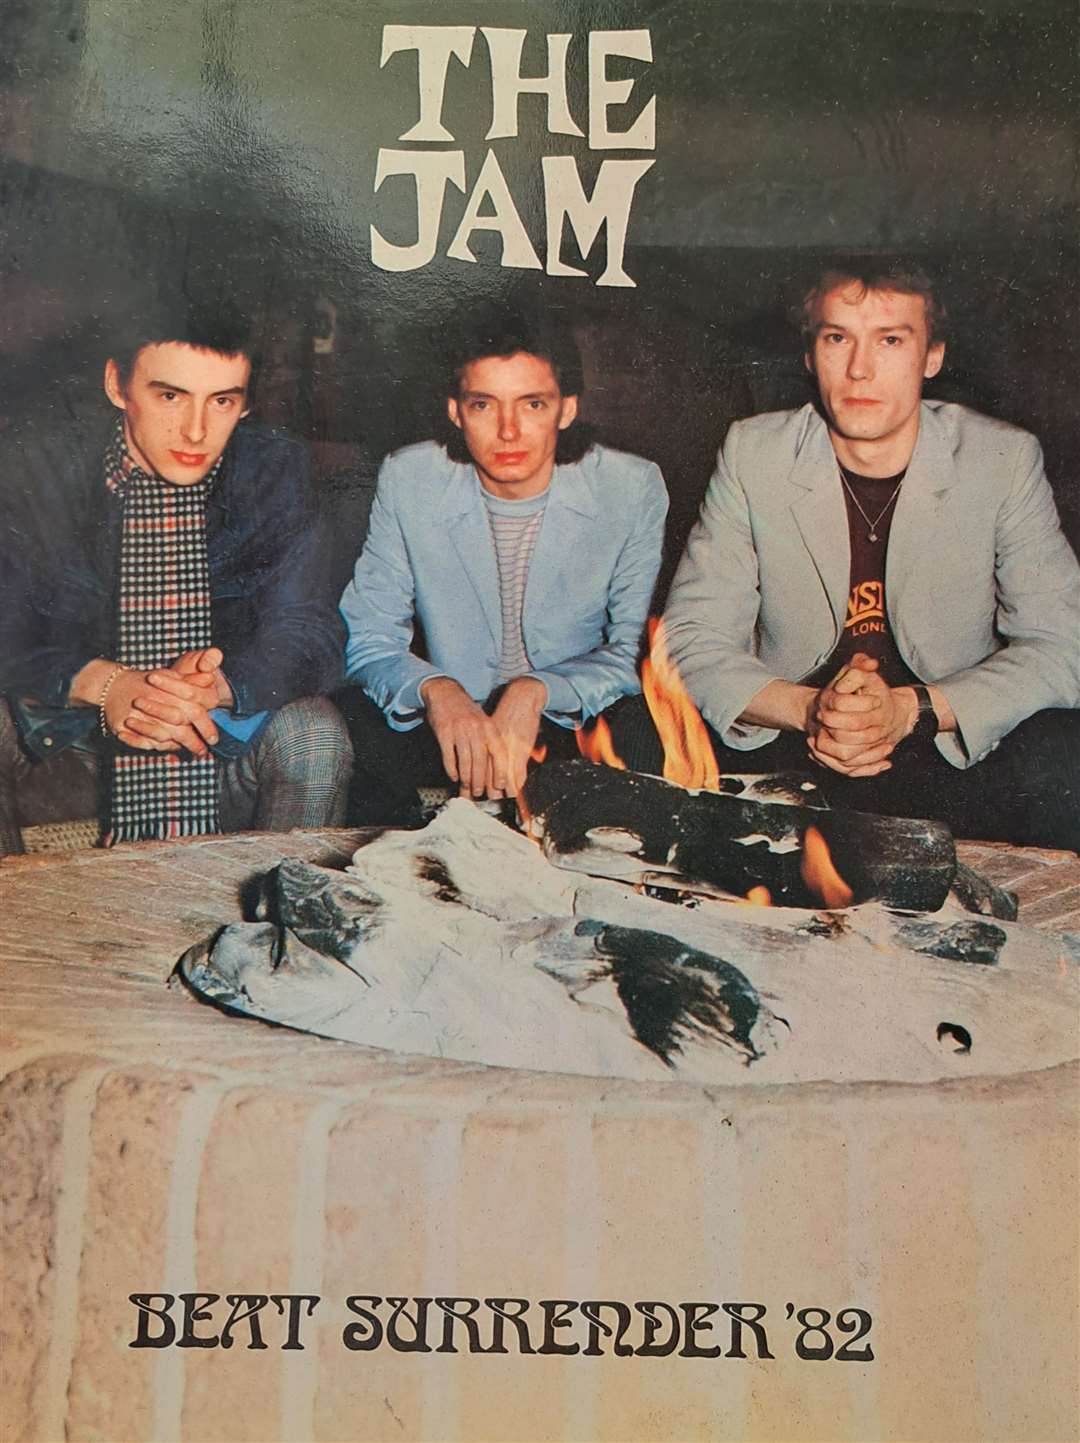 Programme for Mod revival group The Jam's final tour, 1982